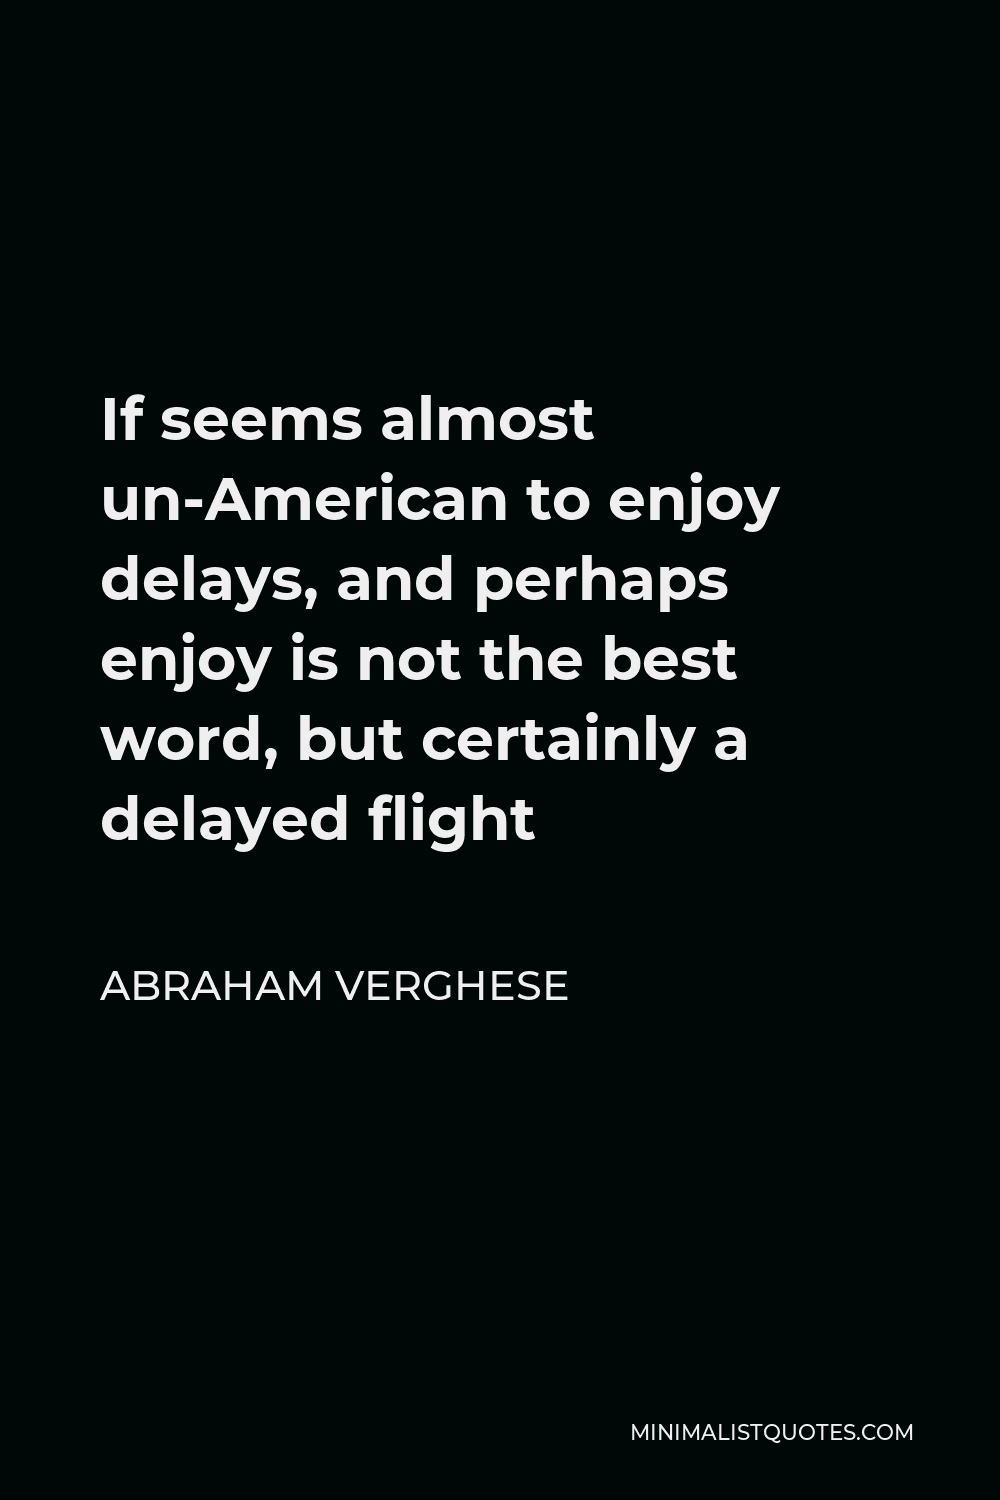 Abraham Verghese Quote - If seems almost un-American to enjoy delays, and perhaps enjoy is not the best word, but certainly a delayed flight